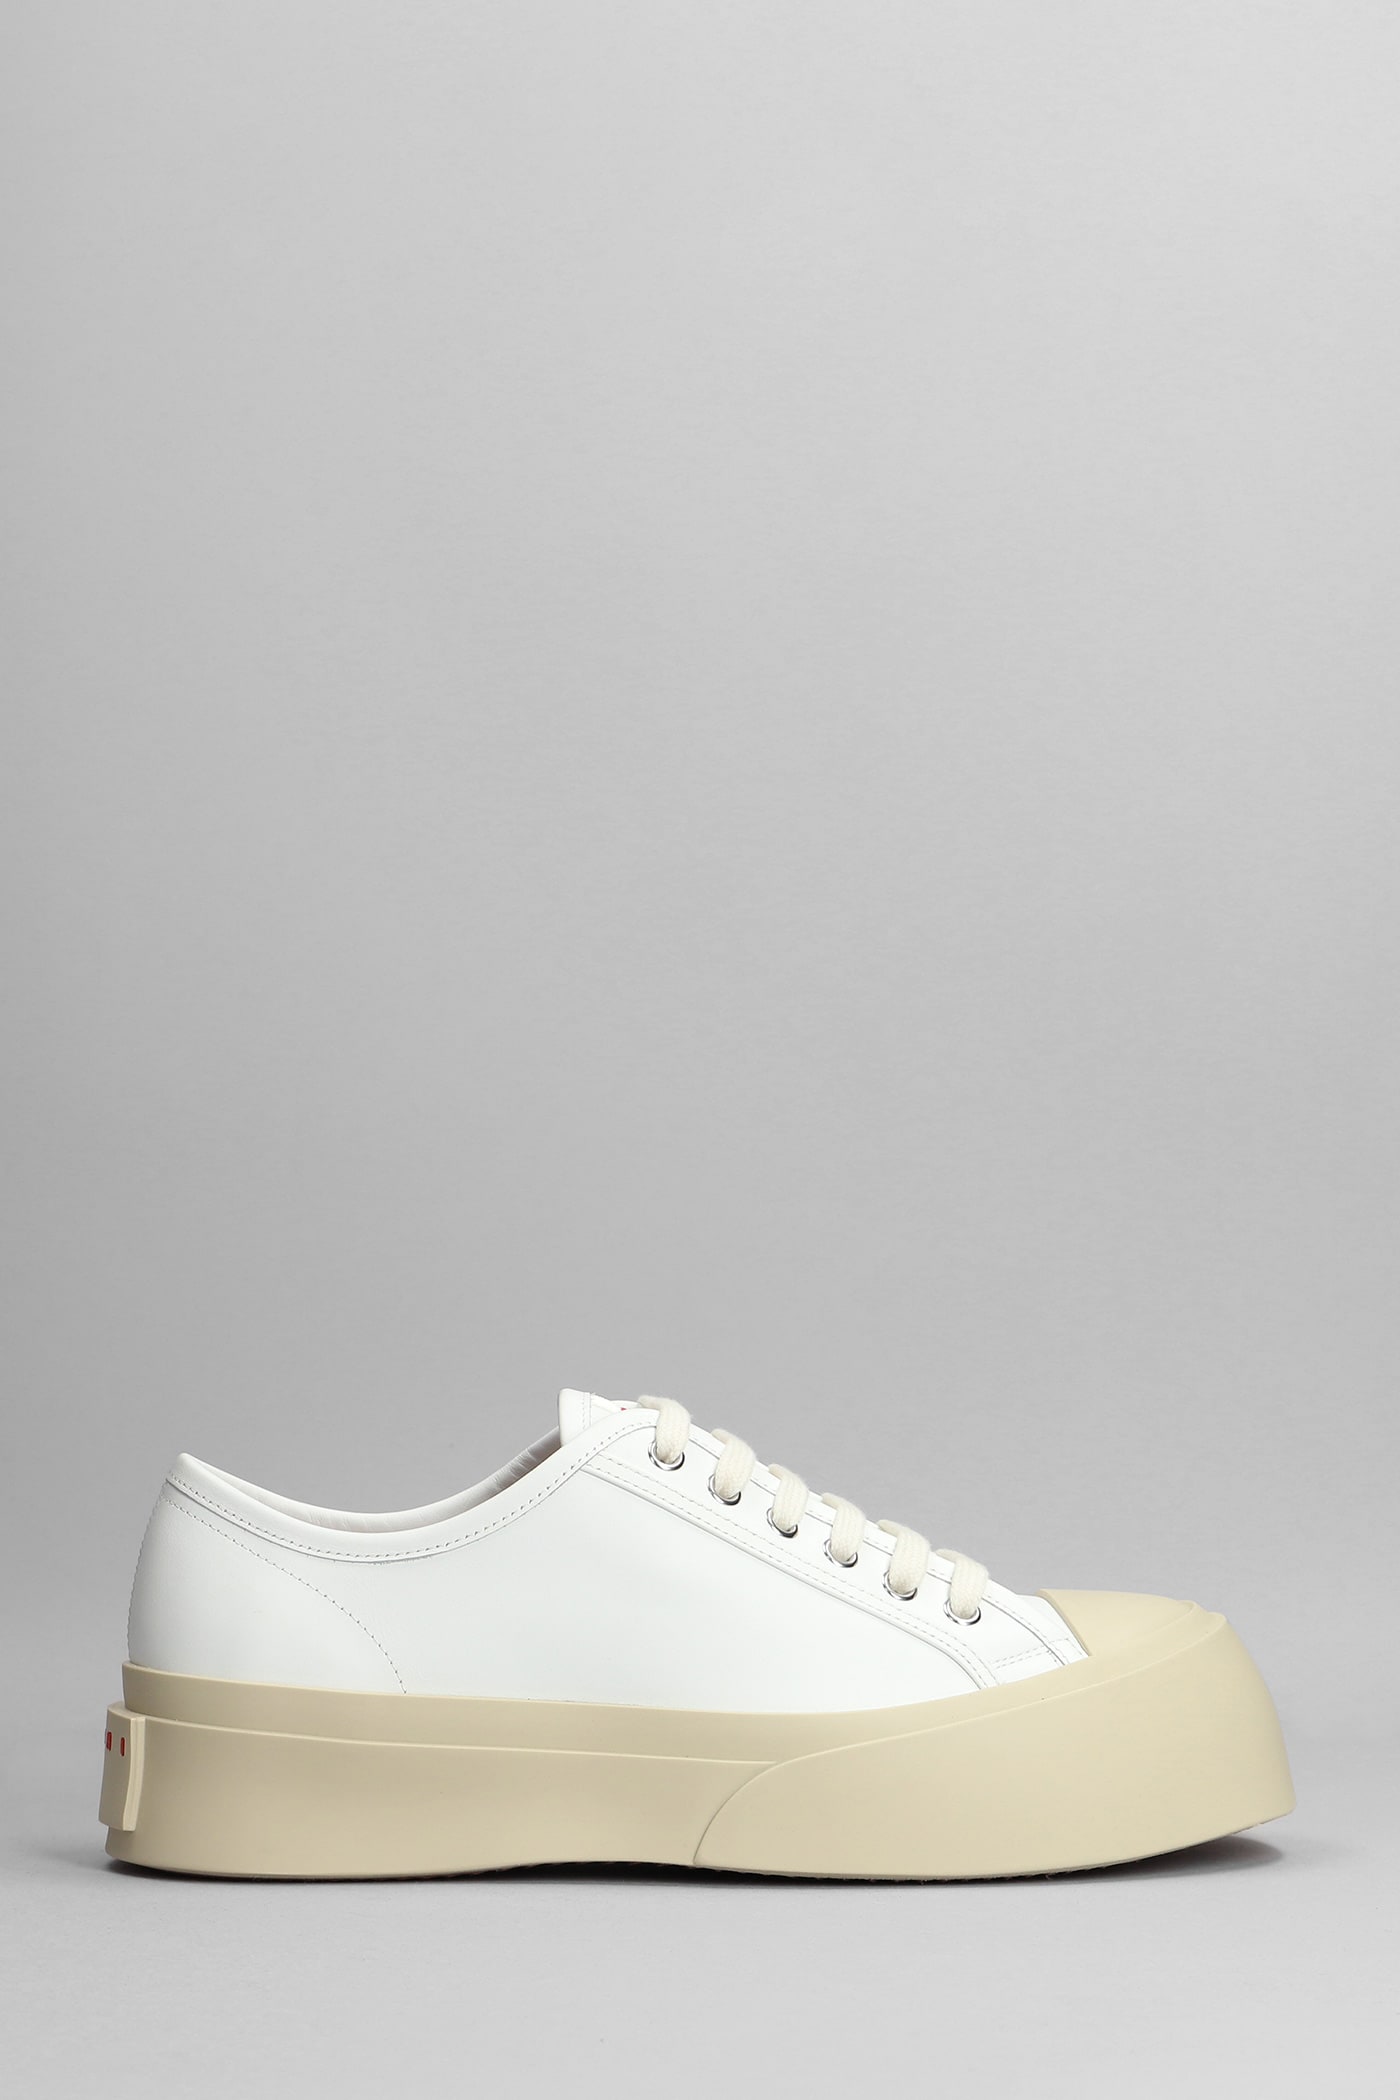 Marni Sneakers In White Leather